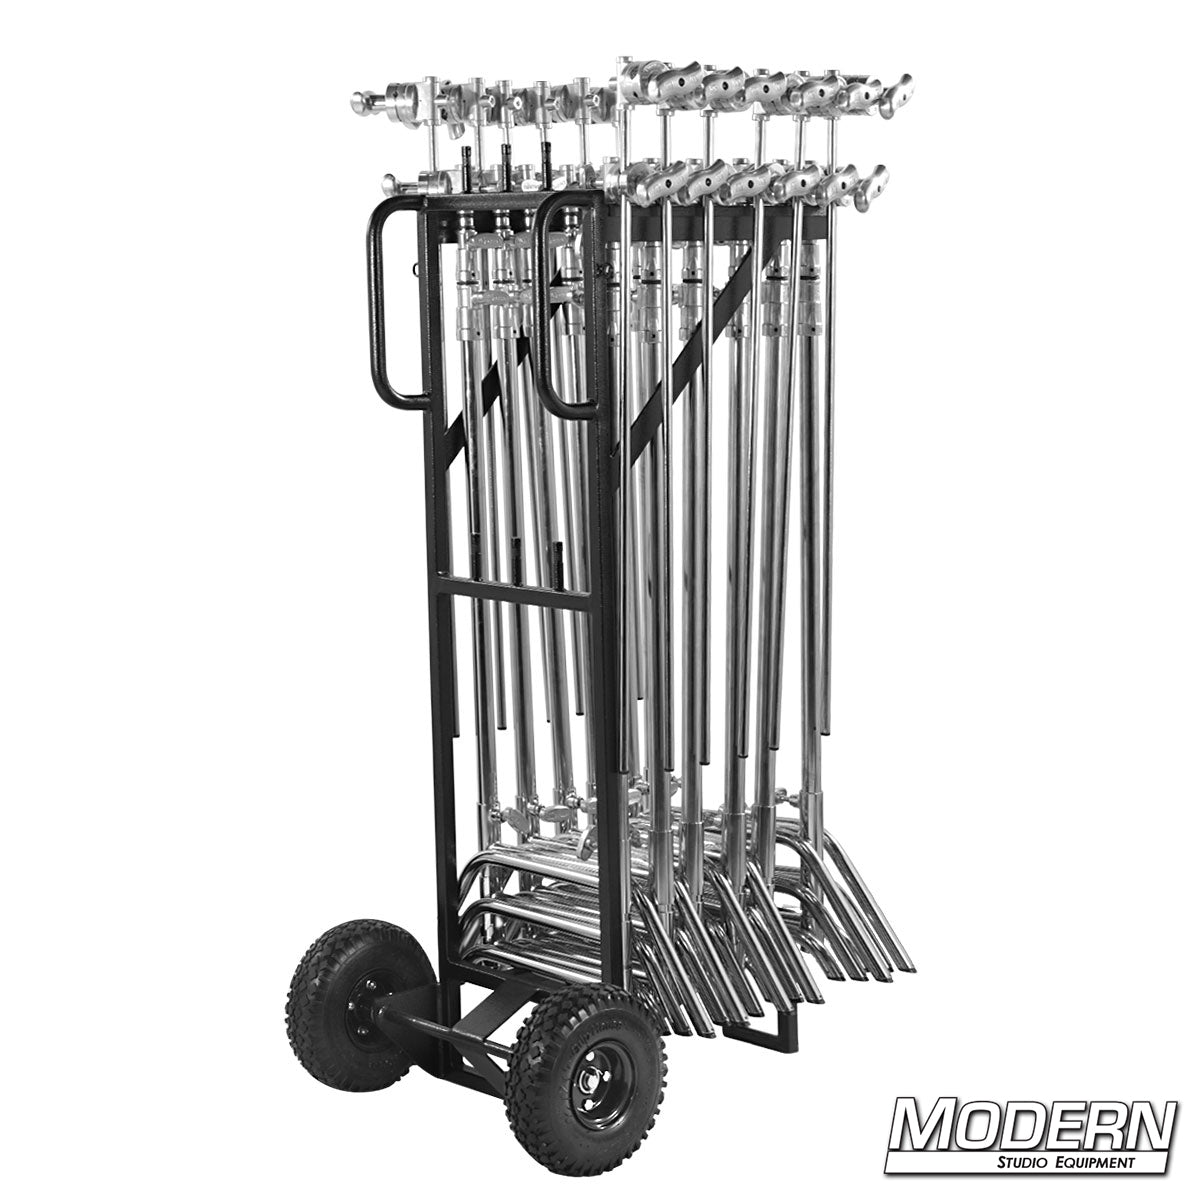 C-Stand Cart Complete with 12 C-Stands